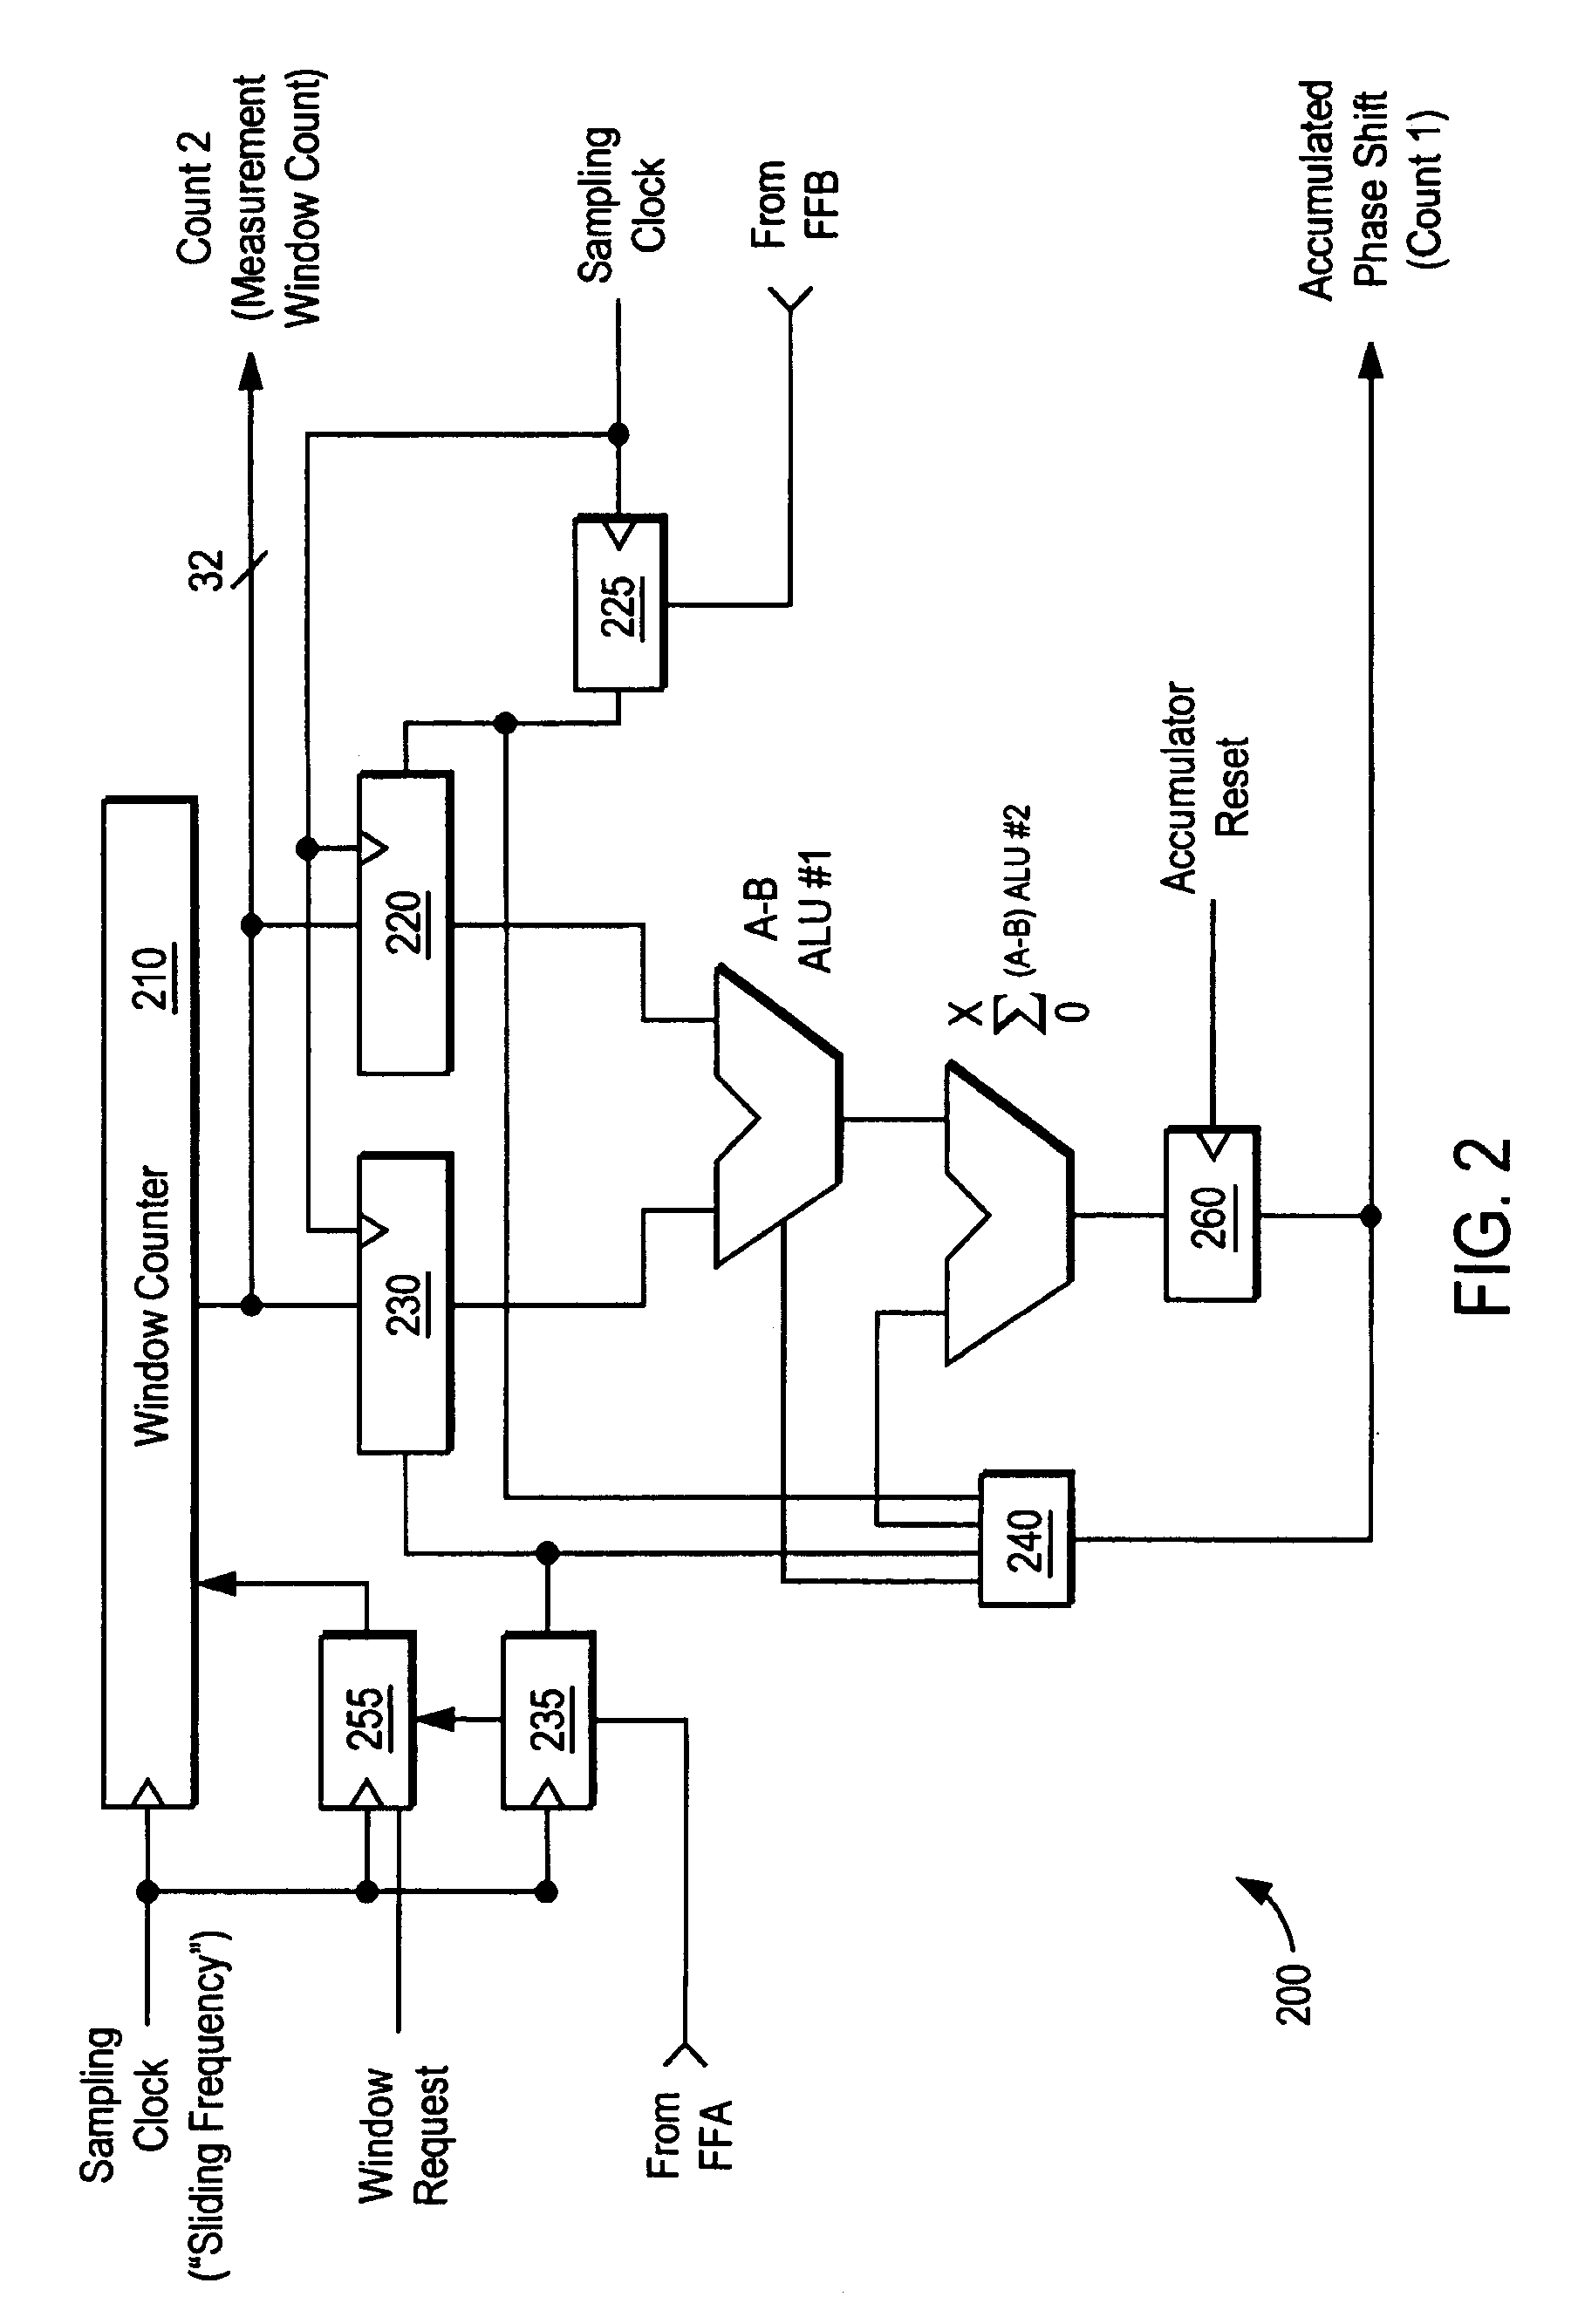 Method and apparatus for delay line calibration